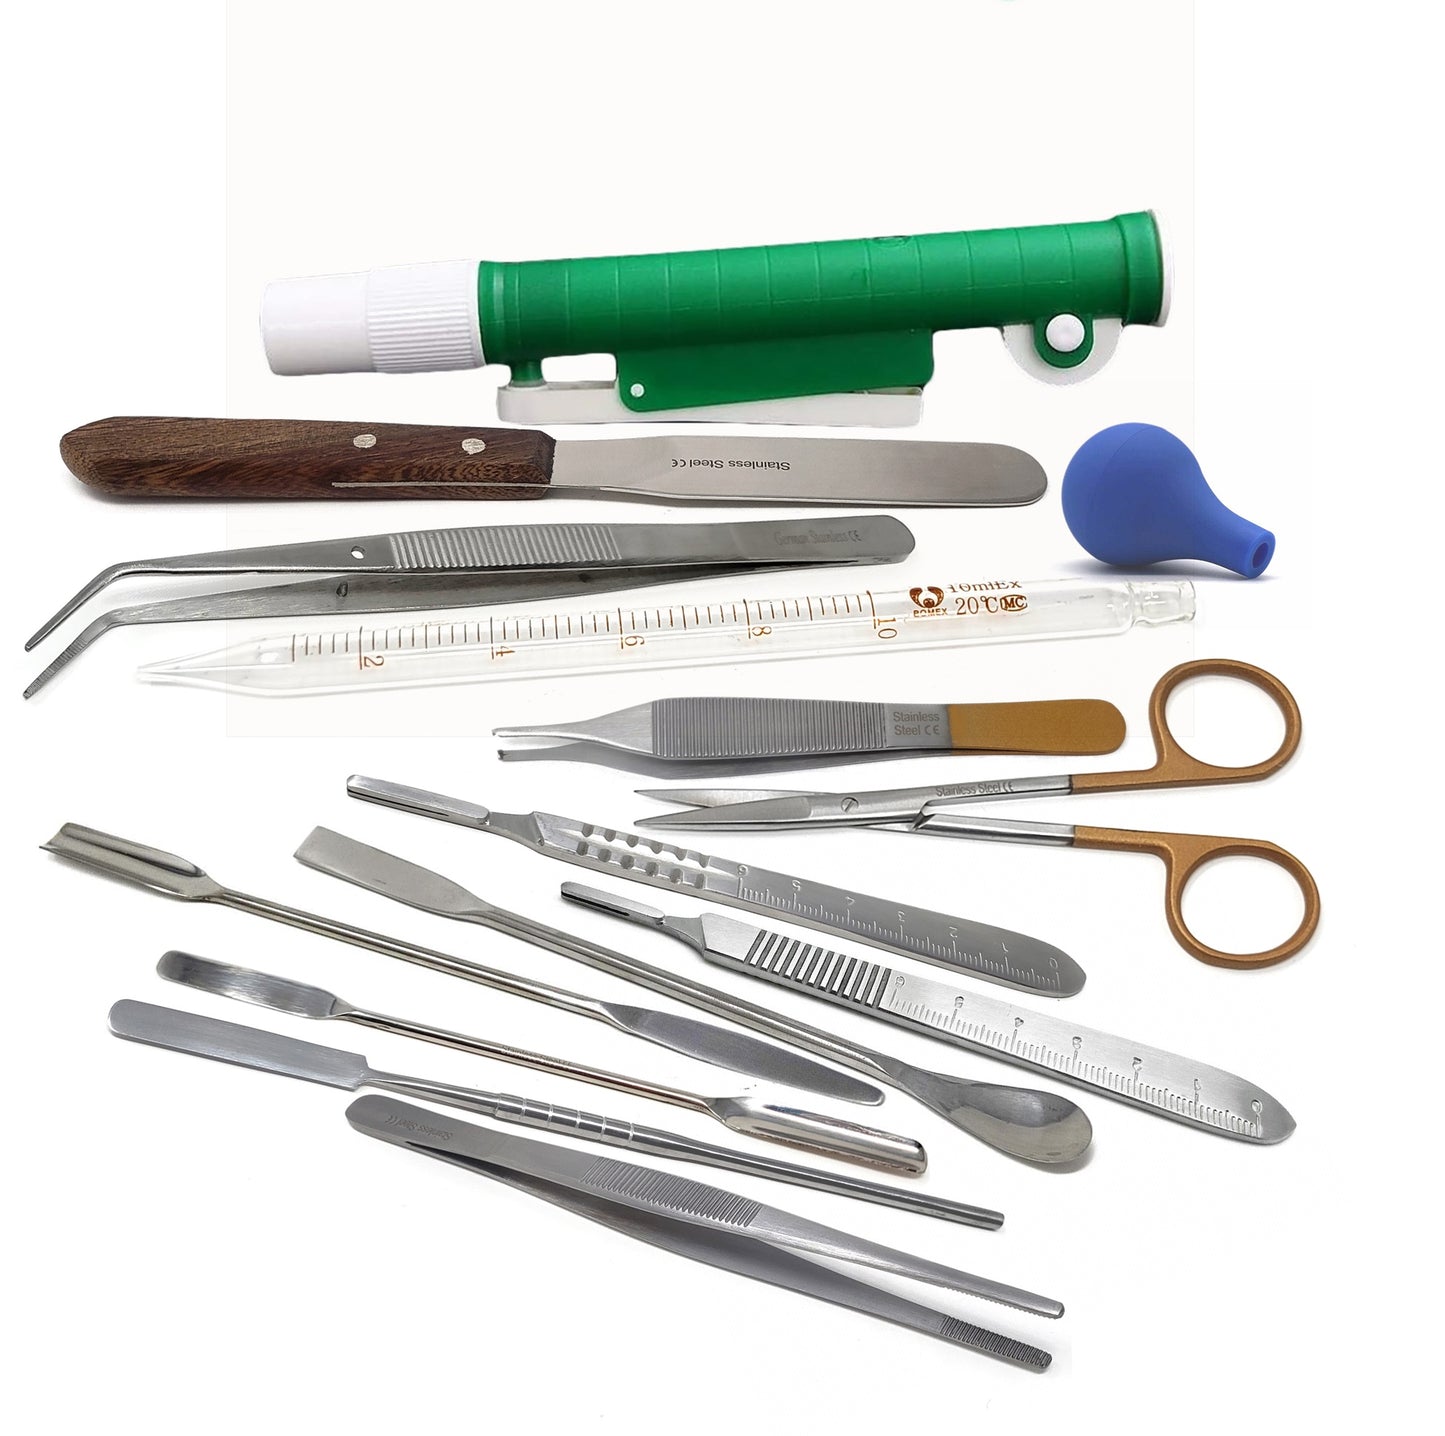 Lab Starter Kit with Stainless Spatulas, Forceps, Dissecting Scissors & Glass Pipettes - 13 Pcs Edition